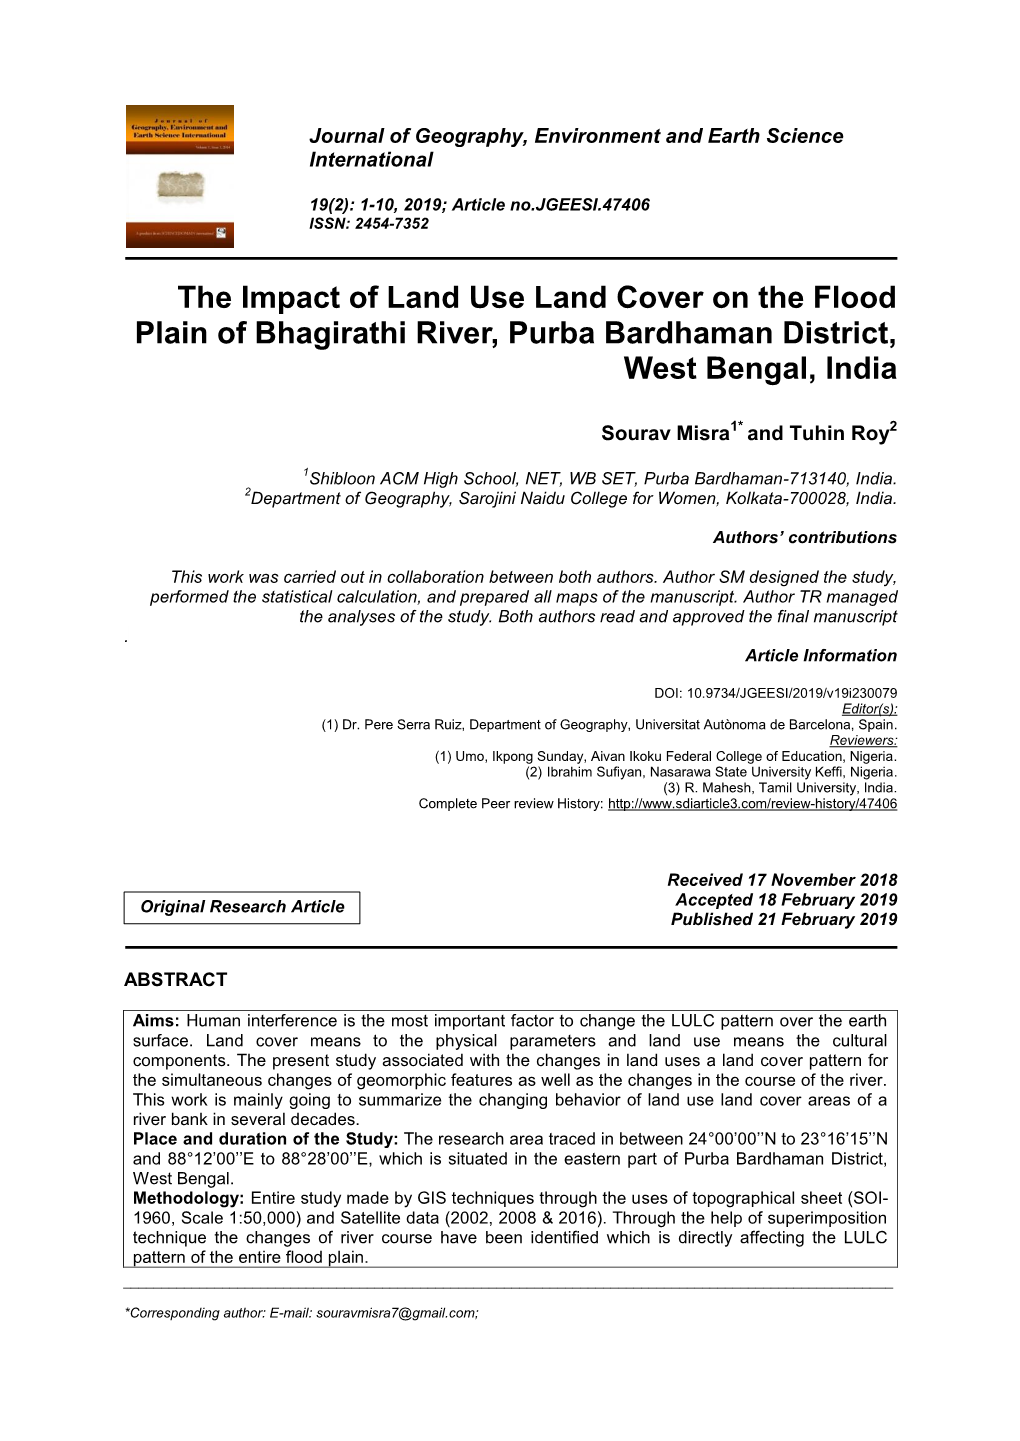 The Impact of Land Use Land Cover on the Flood Plain of Bhagirathi River, Purba Bardhaman District, West Bengal, India